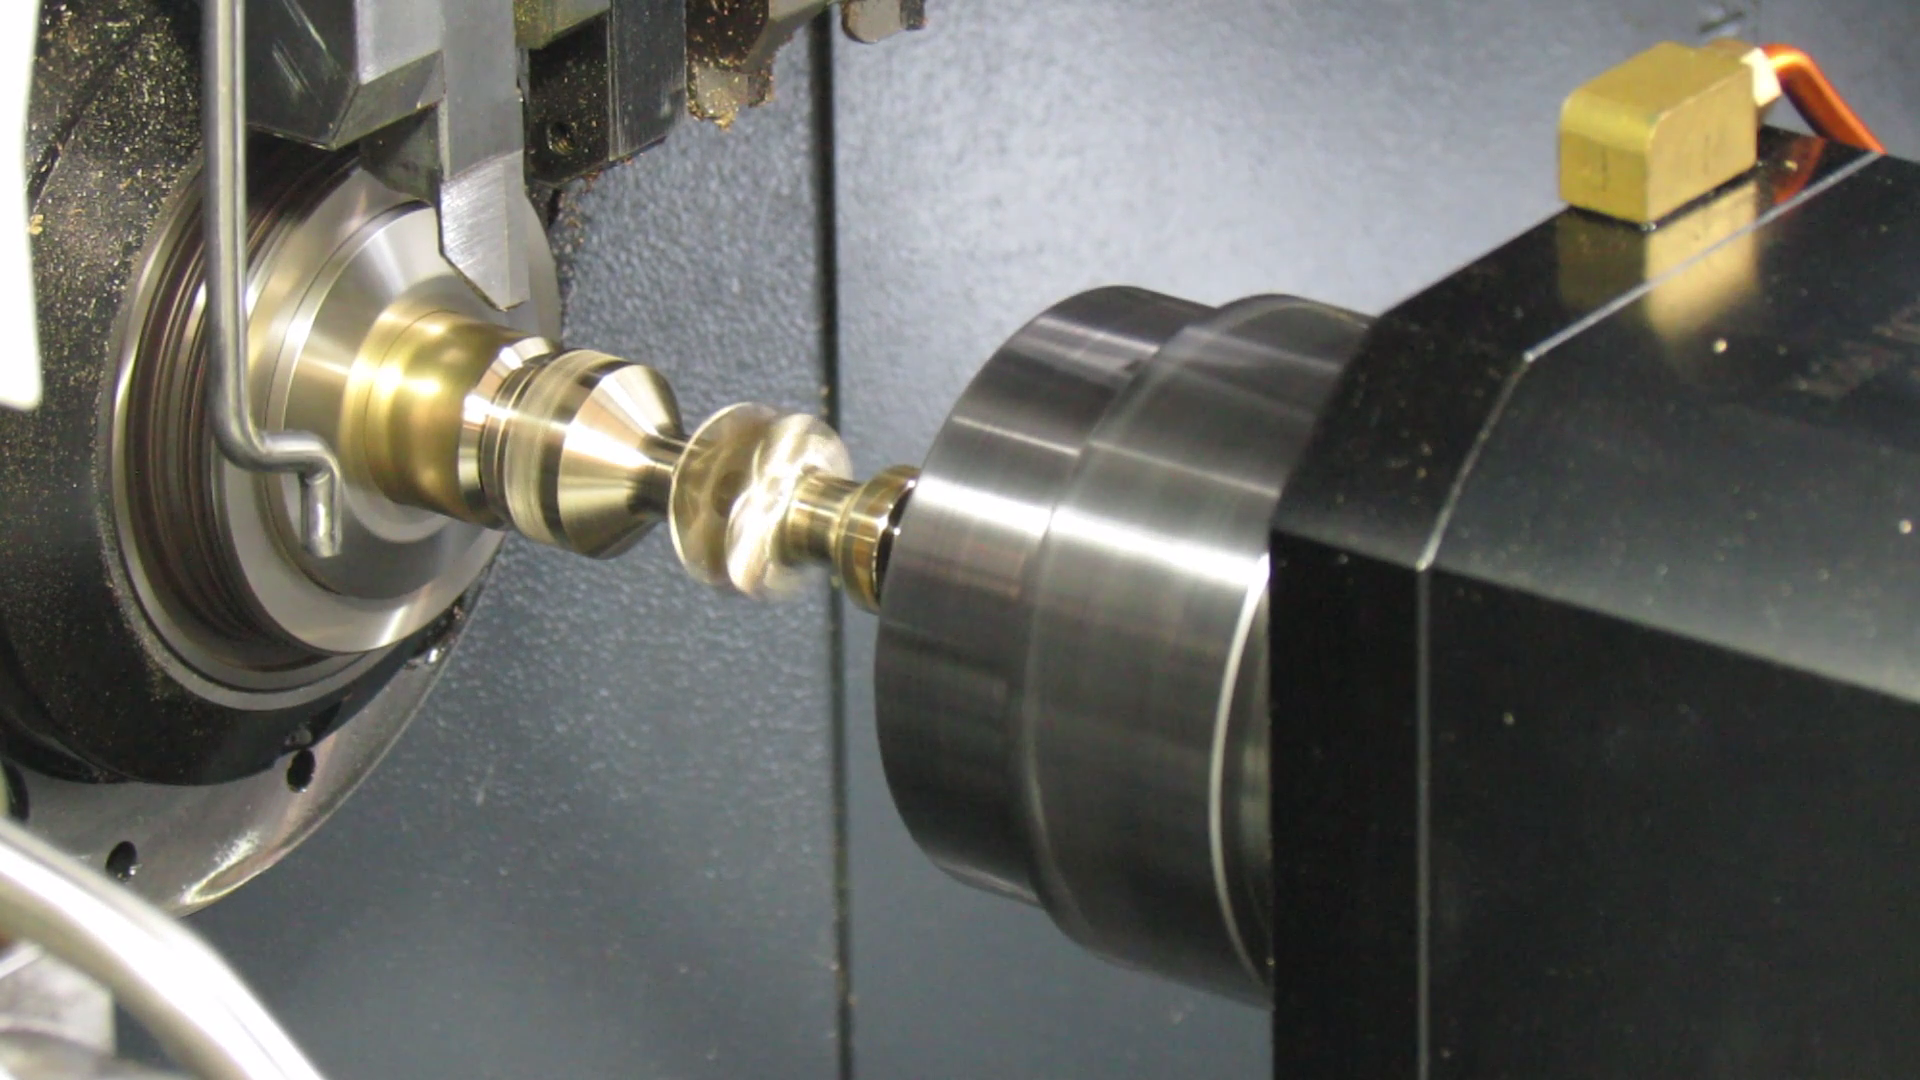 Sub-spindle butt joint workpiece with main spindle